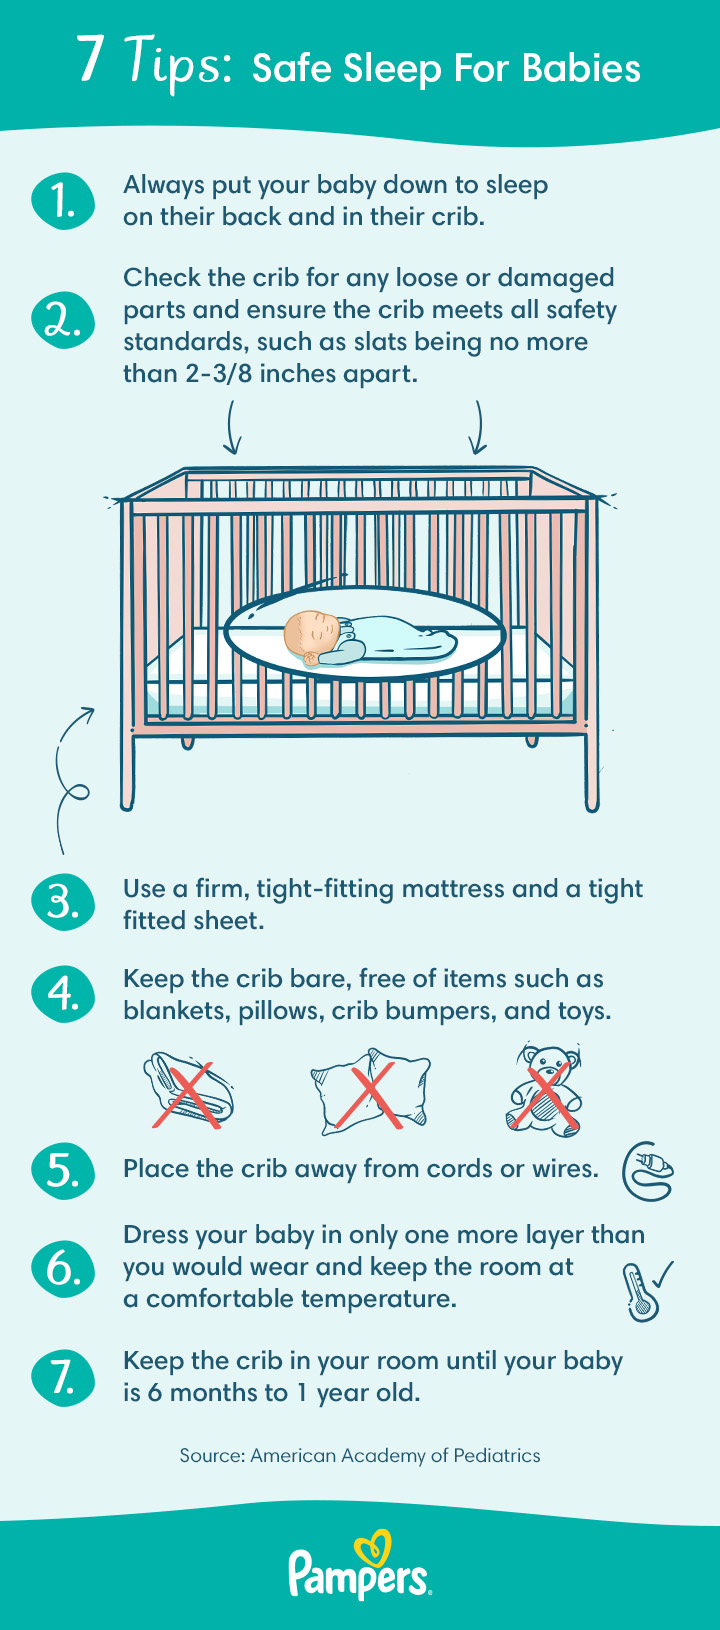 What's The Safest Room Temperature For a Baby?